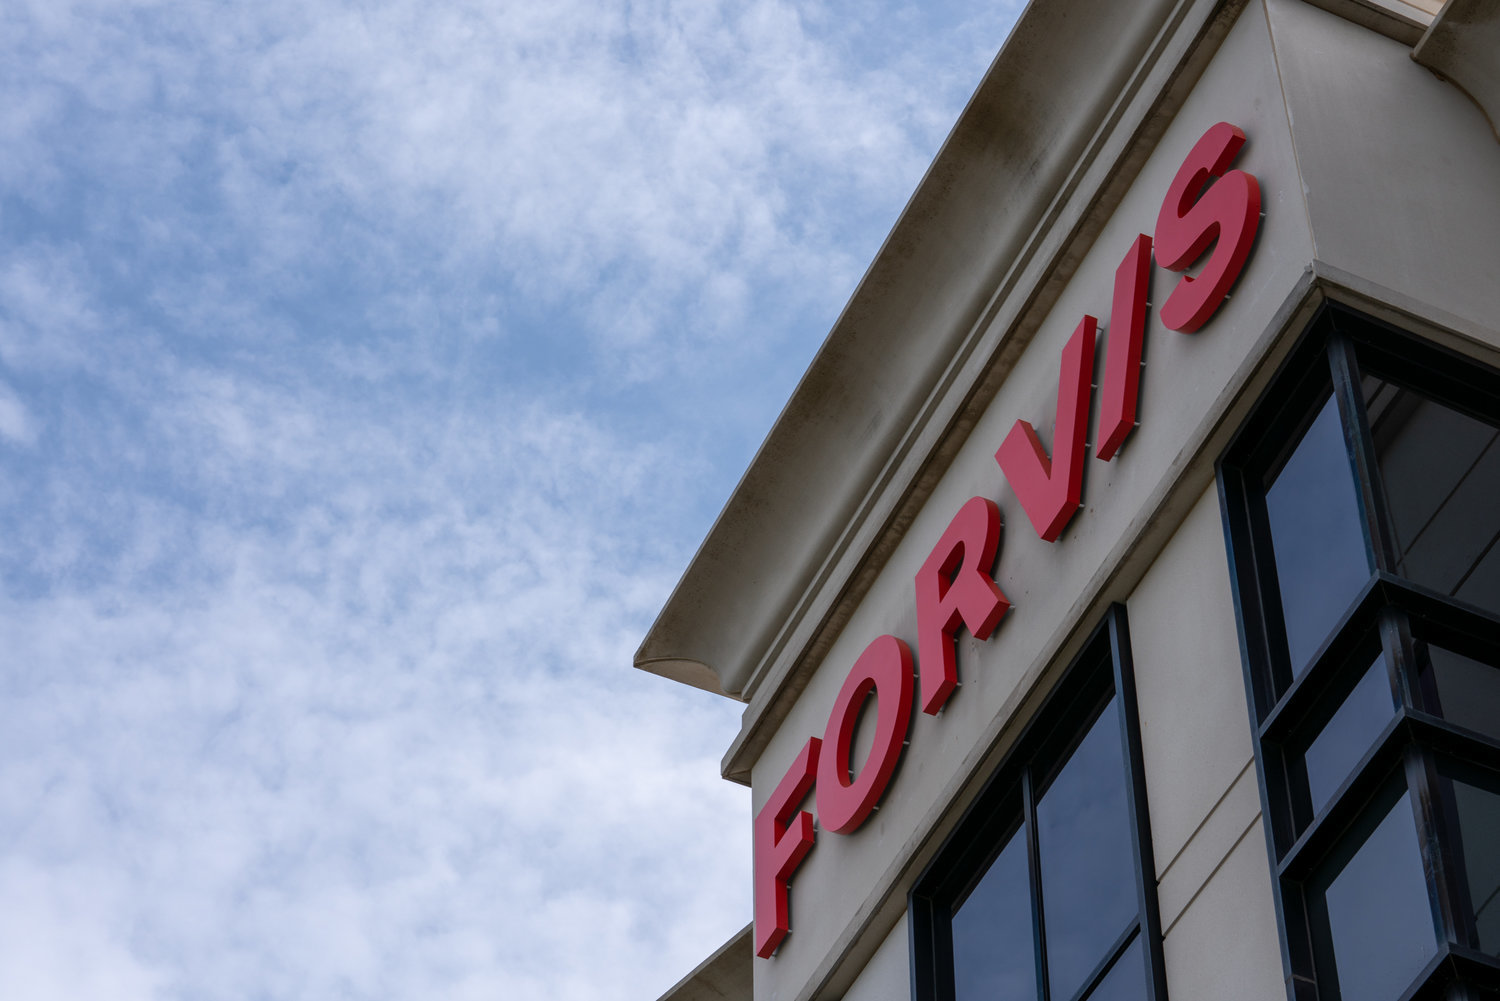 FORVIS has entered an asset purchase agreement with a Kentucky company.